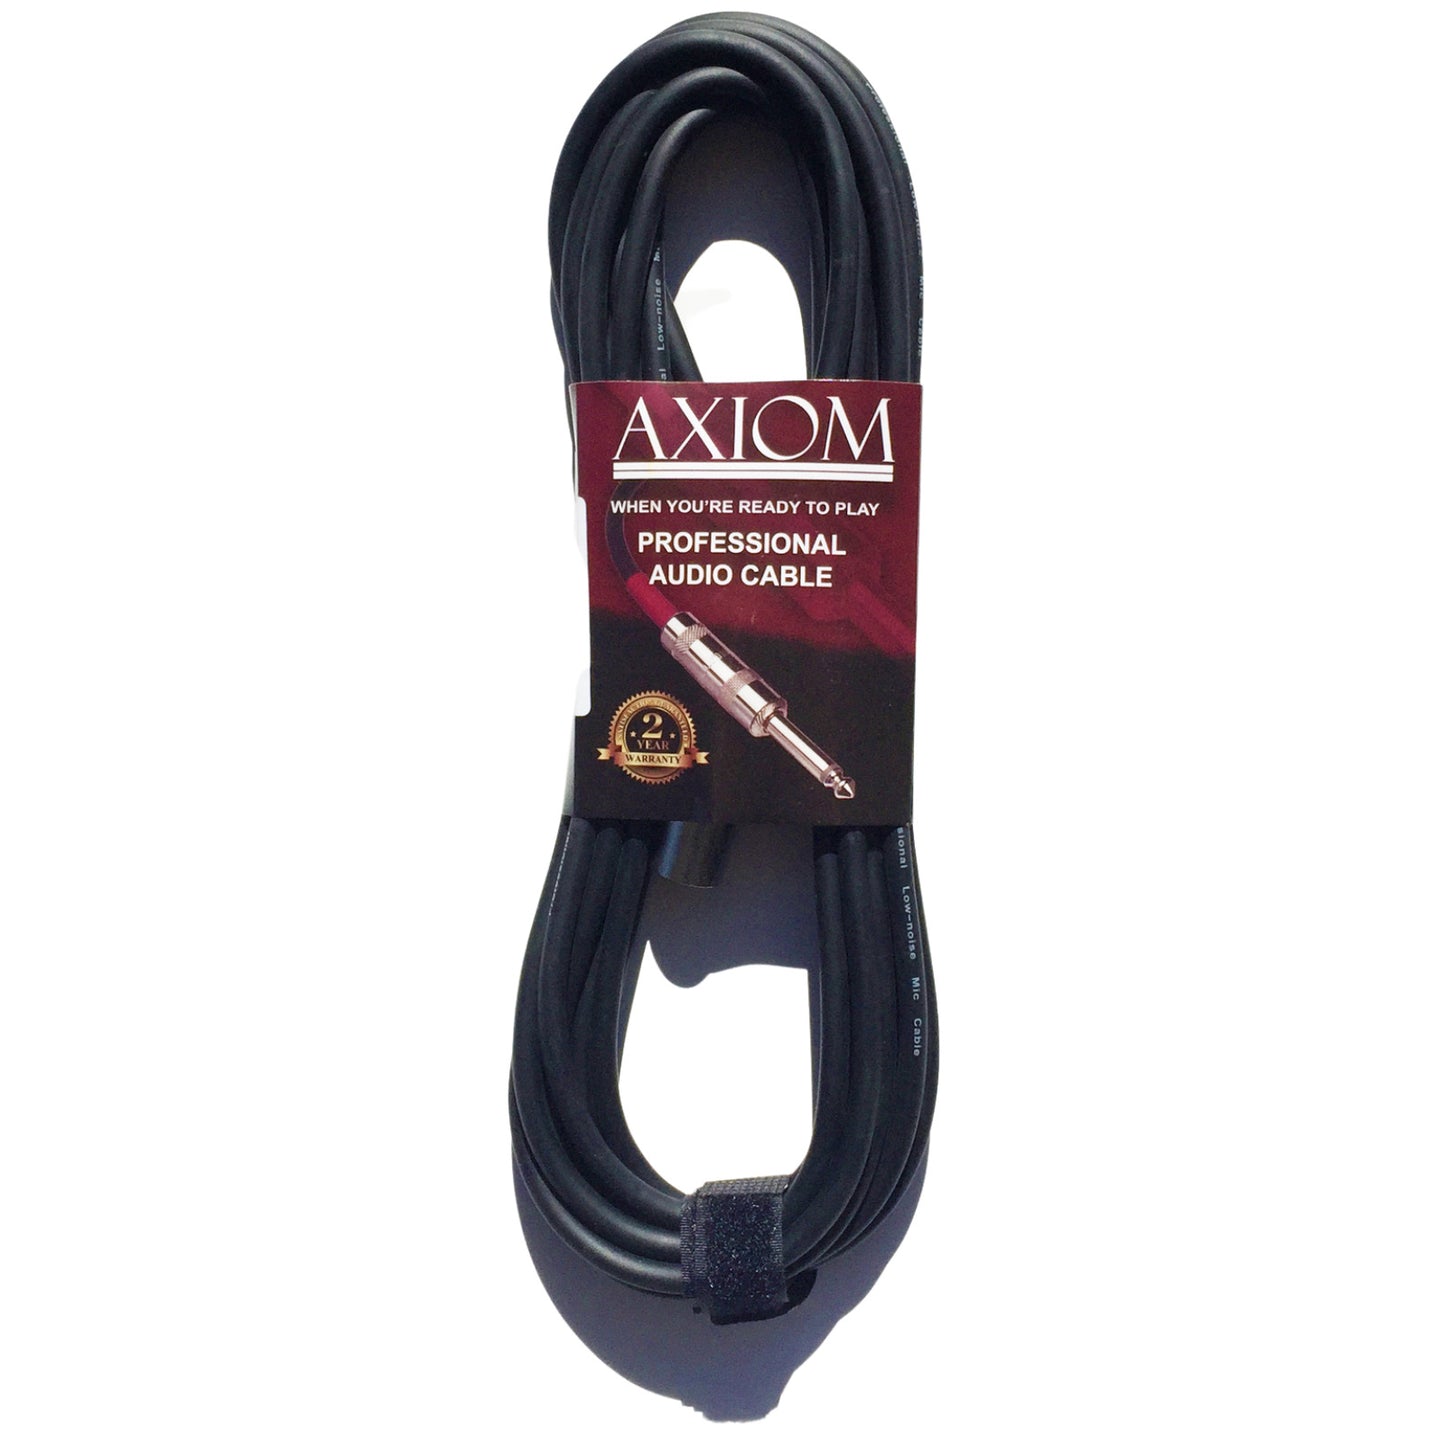 Axiom Microphone cable - 20' Can/Jack